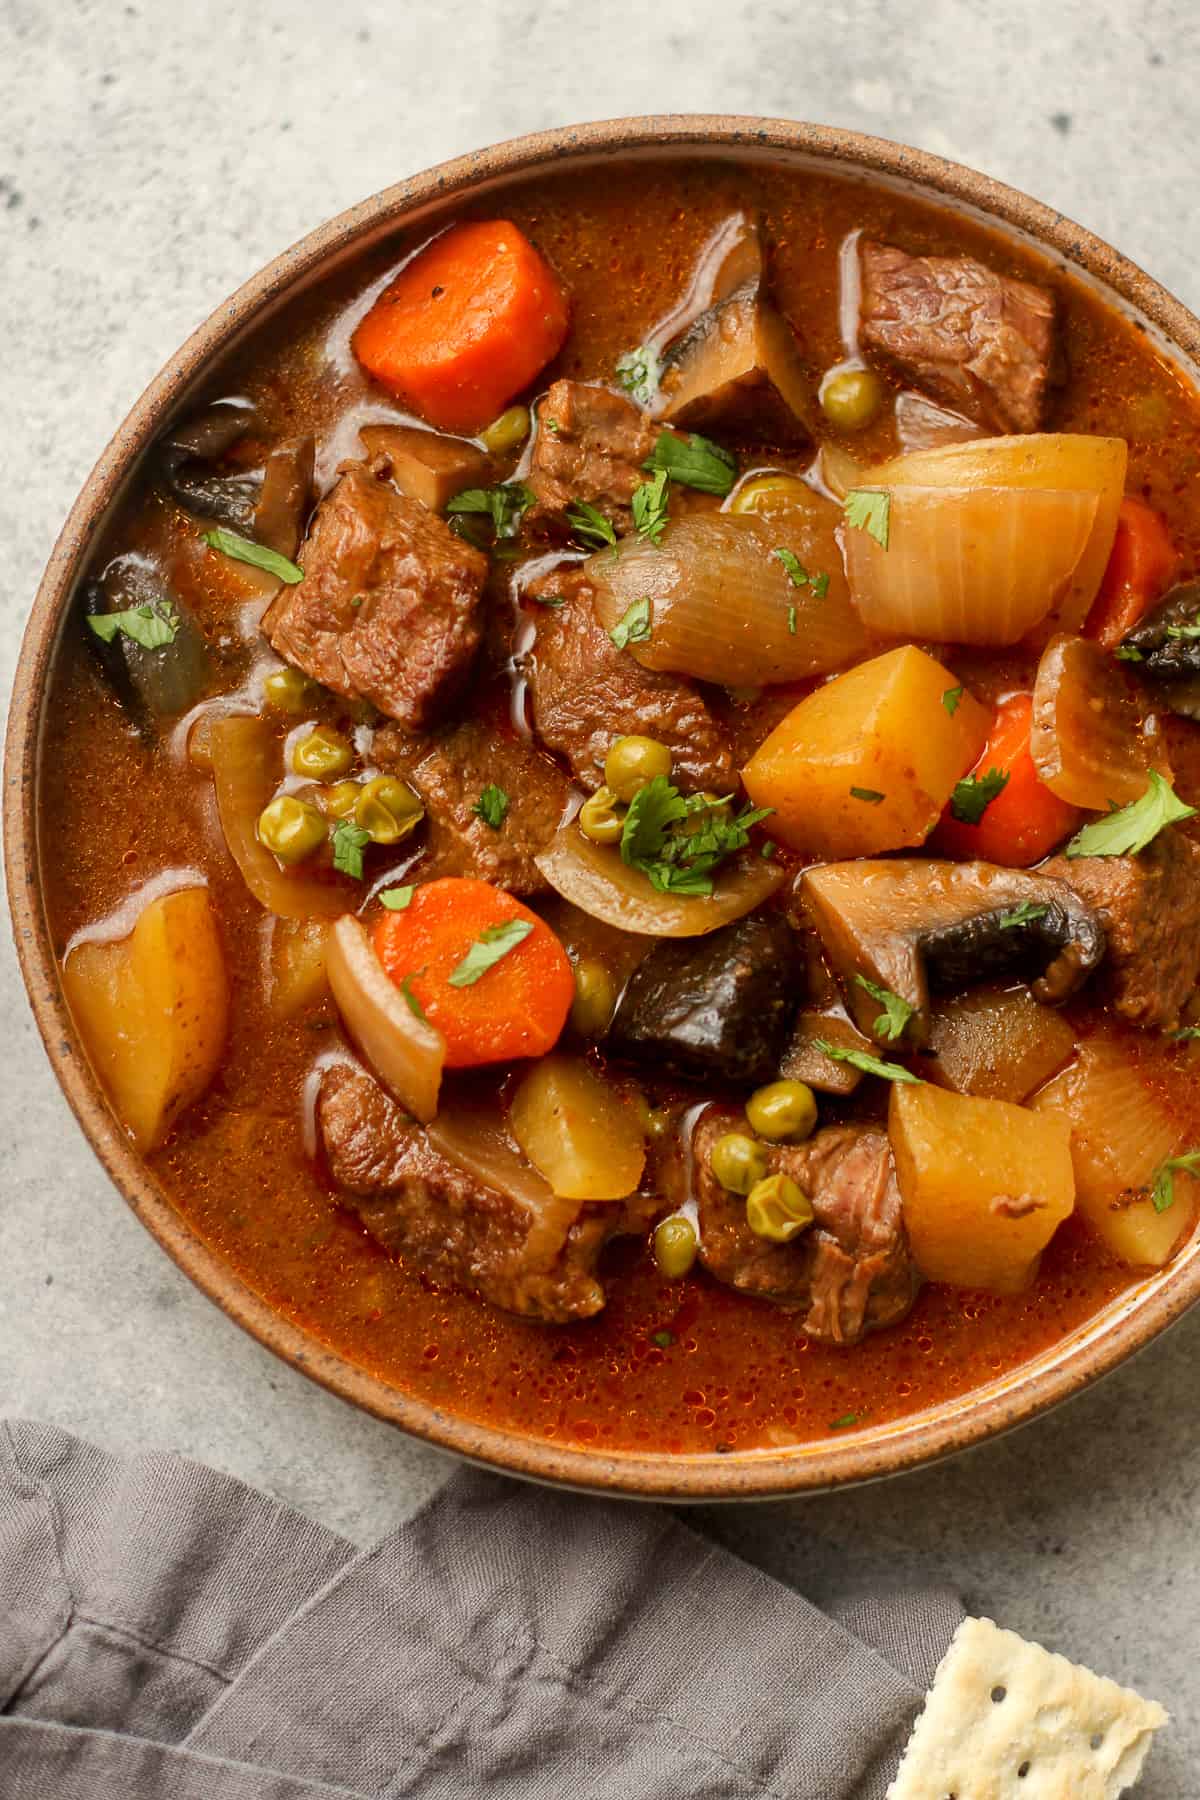 A closeup on a late bowl of beef stew with mushrooms.